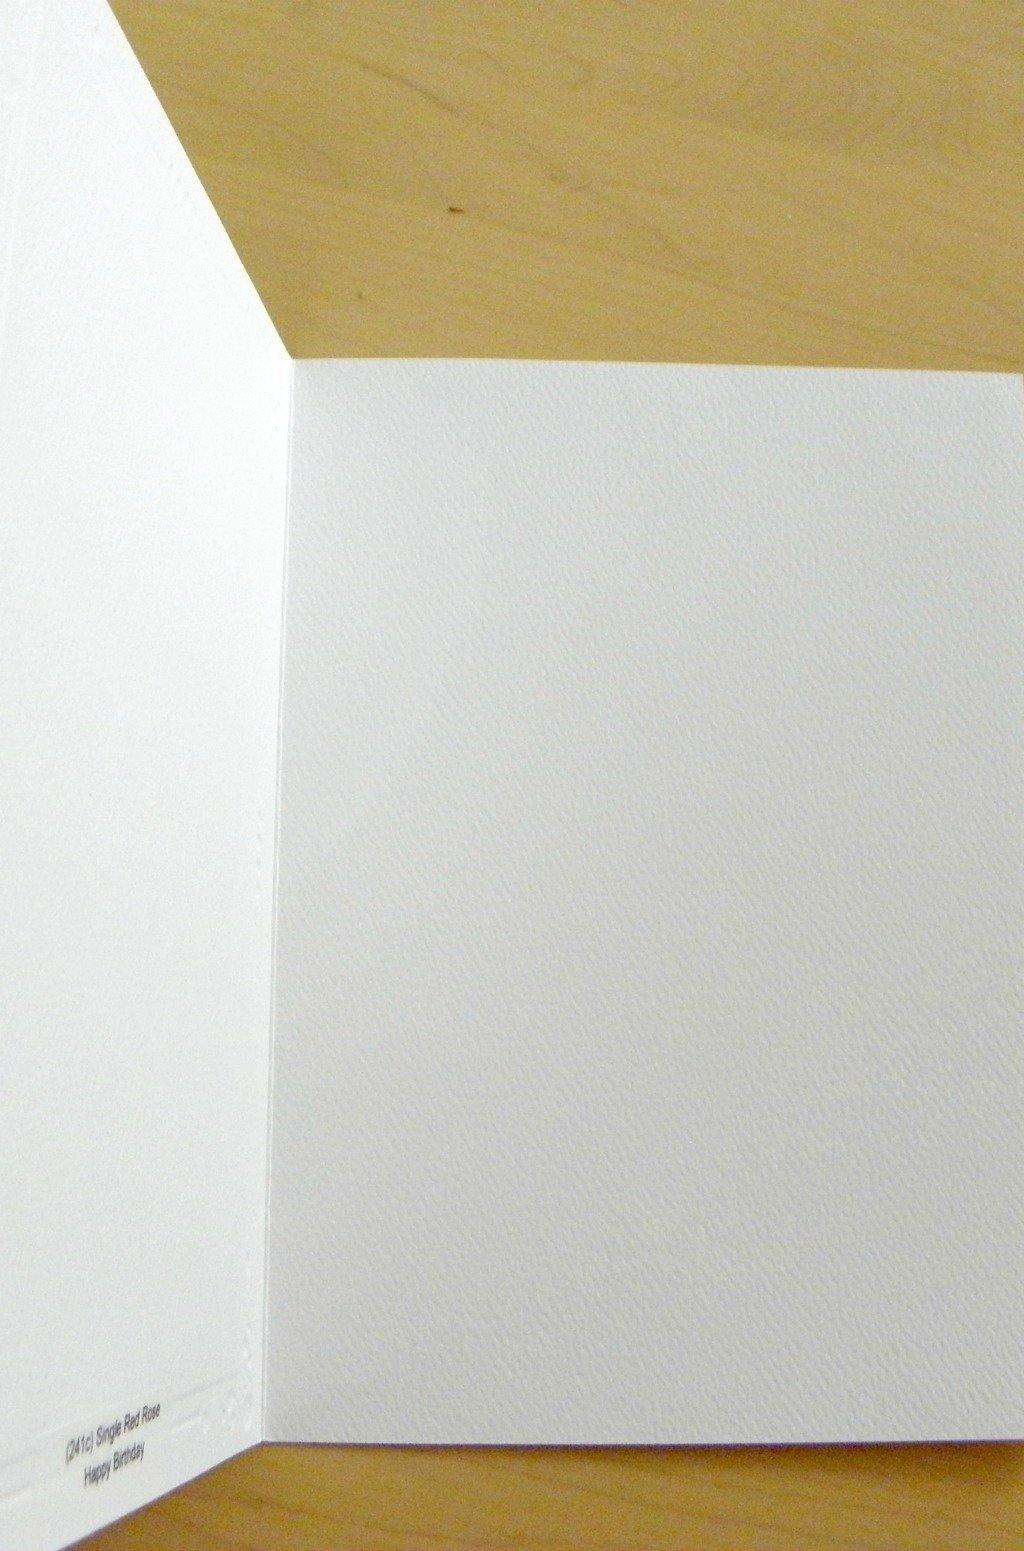 Inside view of the blank inside